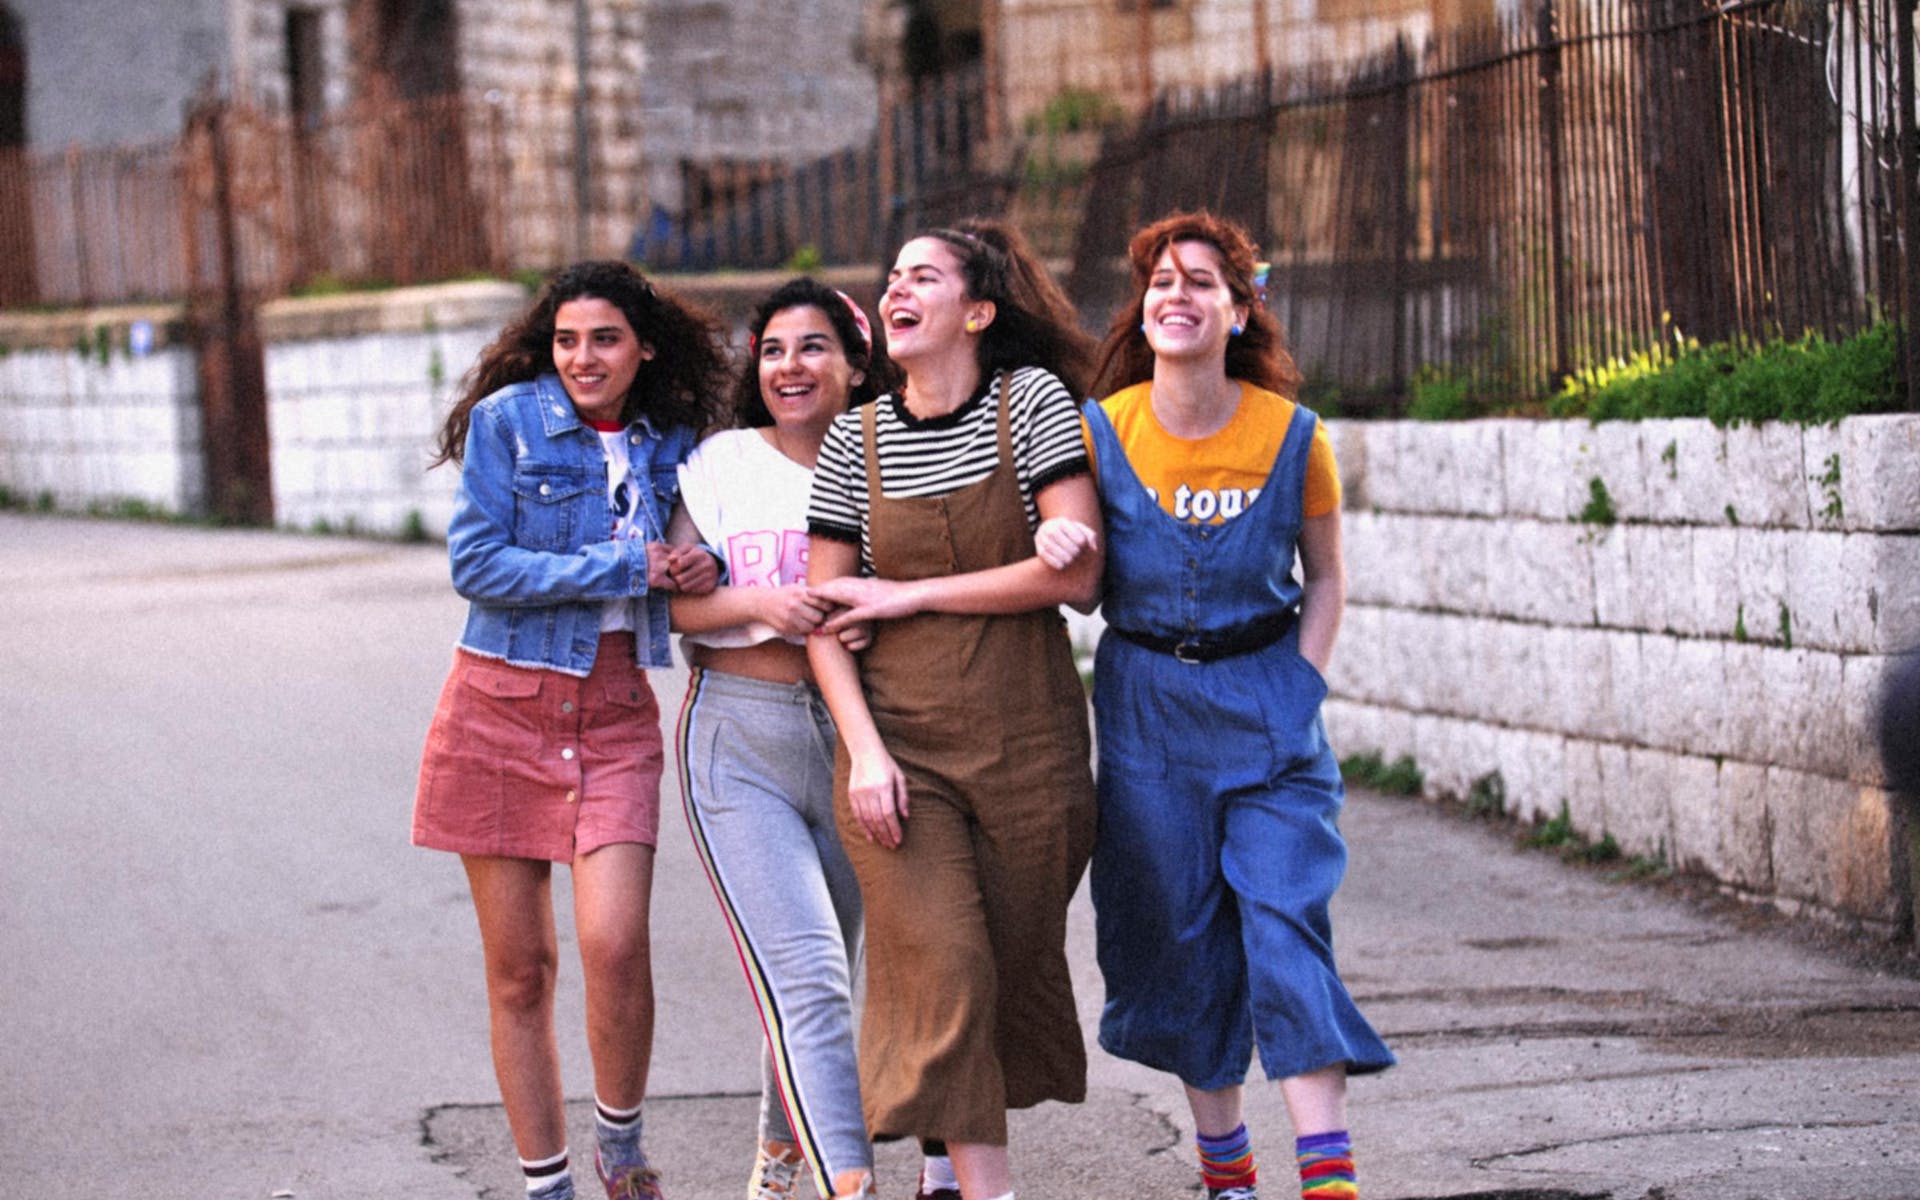 A goup of young women walk and laugh together on a city street.